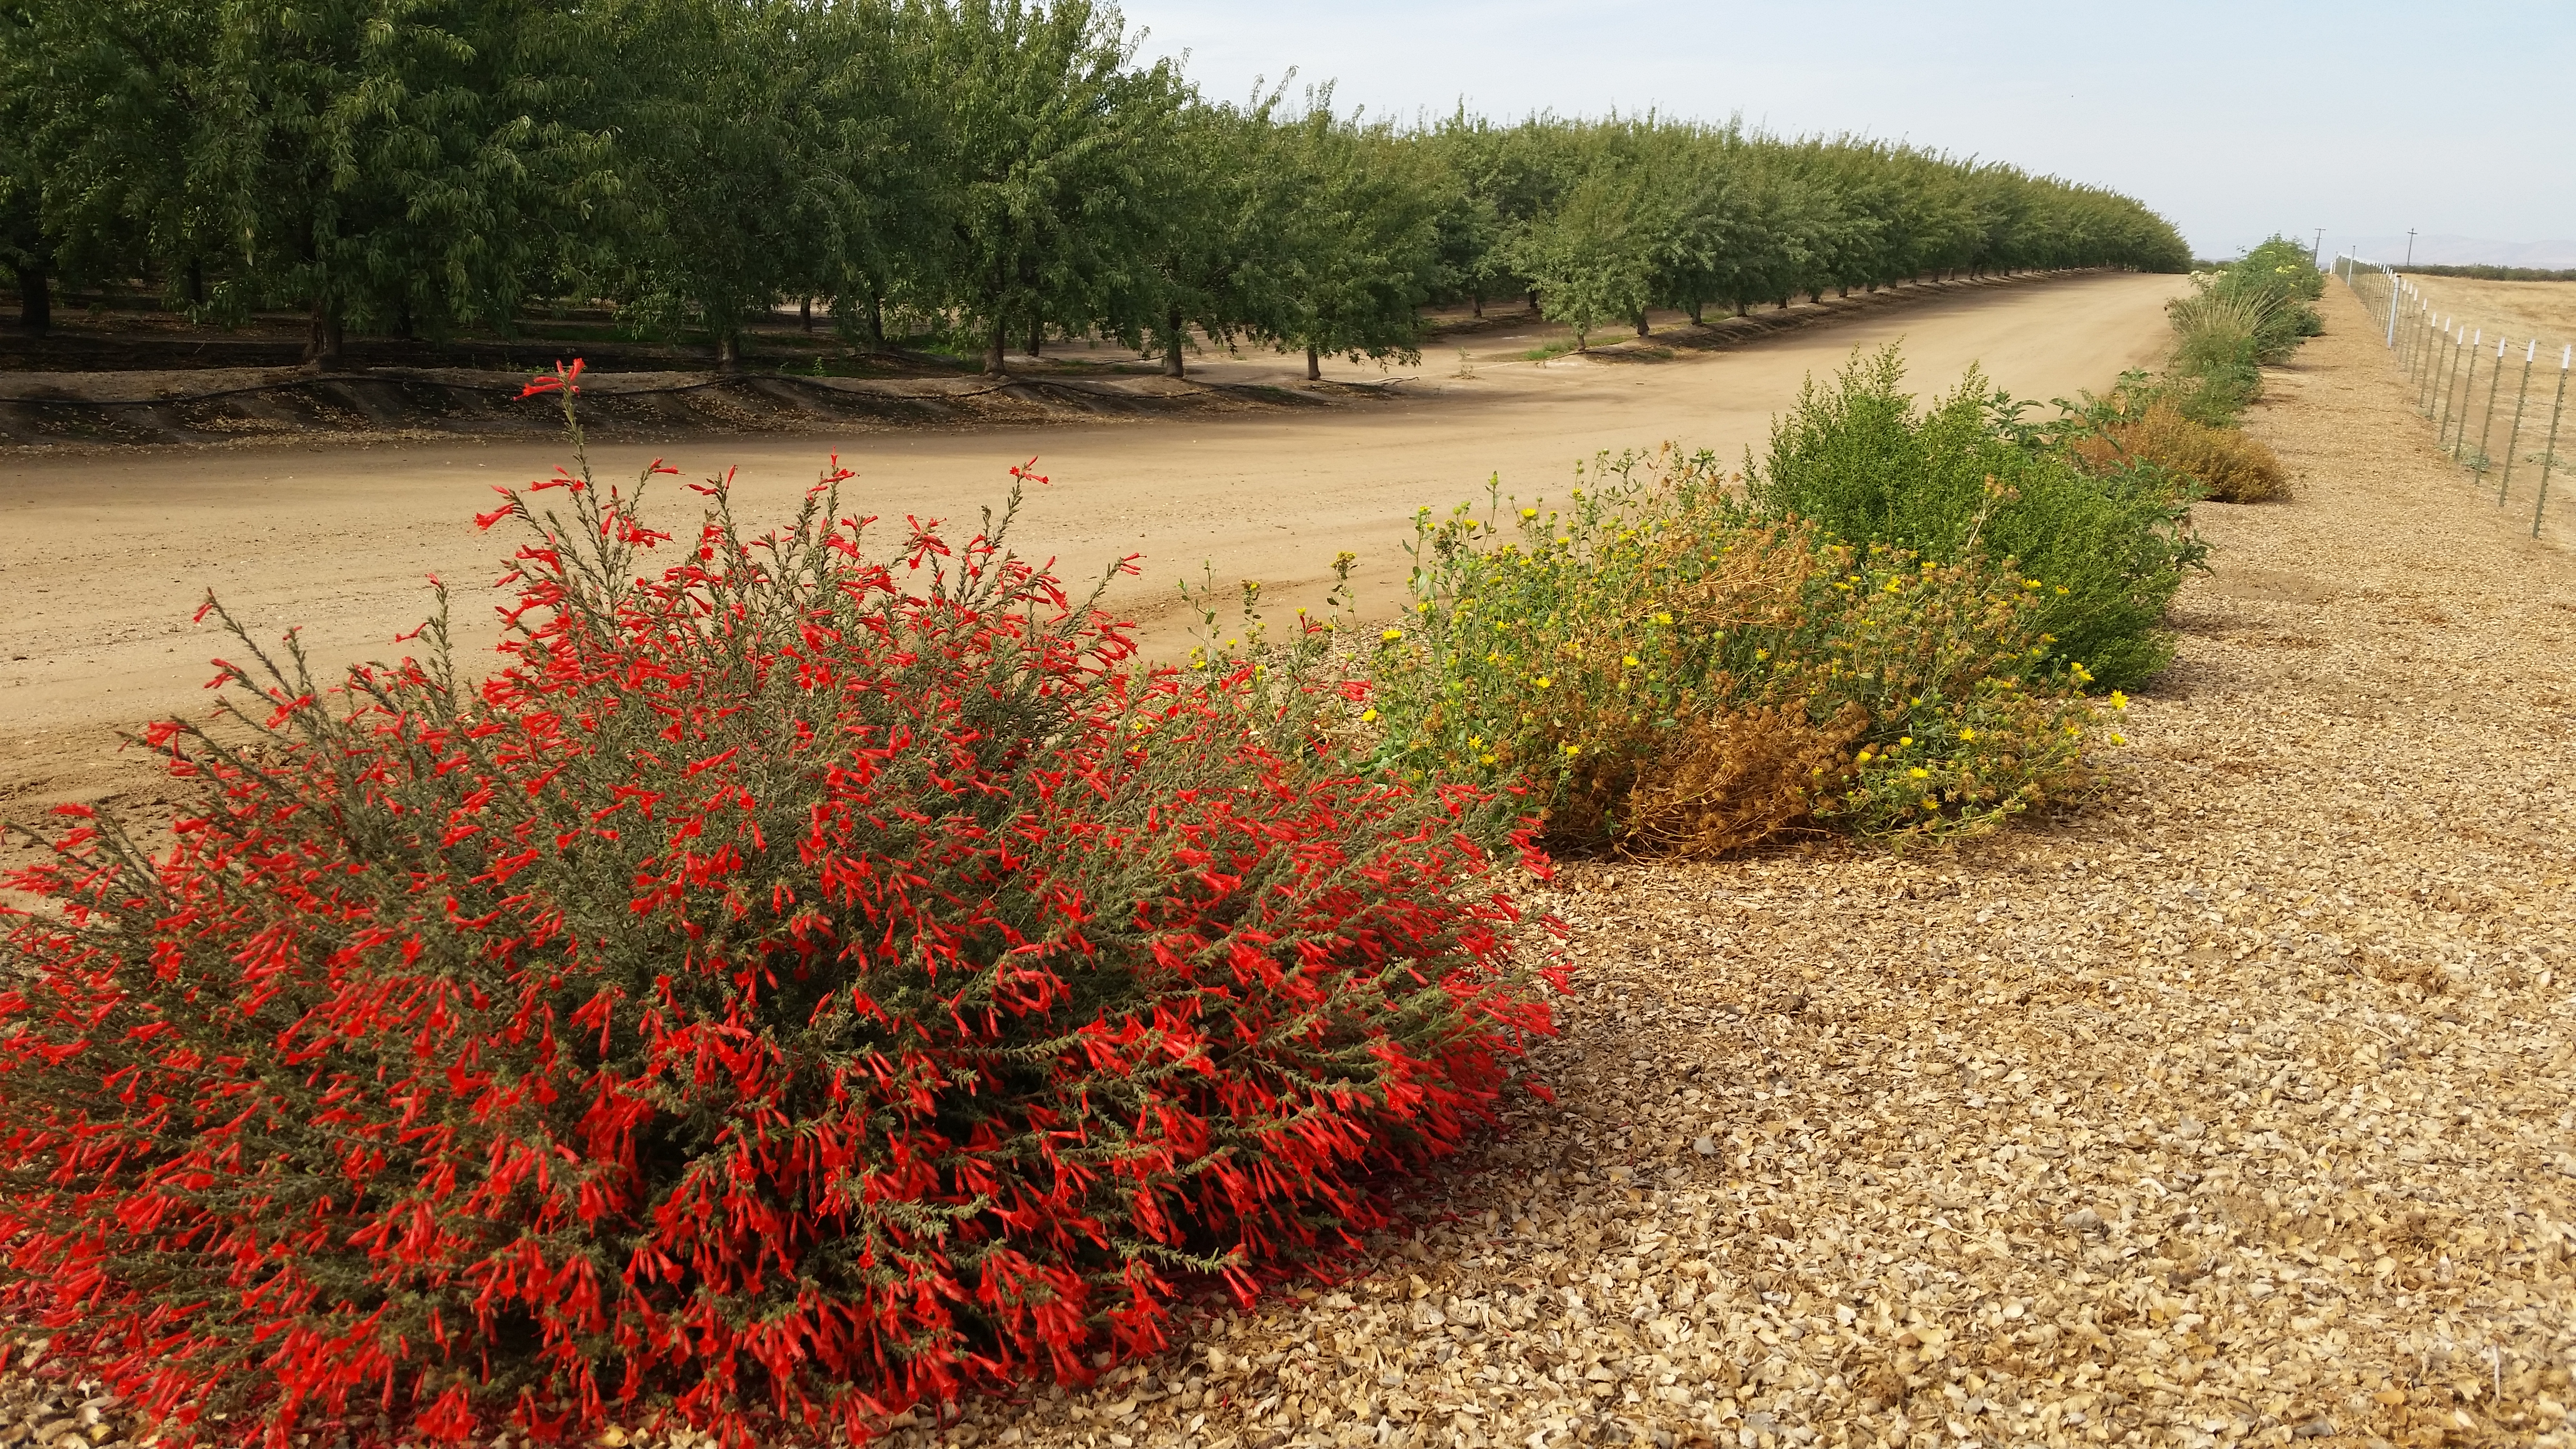 A line of colorful, flowering plants, including a bush with red blossoms in the foreground, recedes into the distance. Parallel to this line are rows of trees in an orchard.